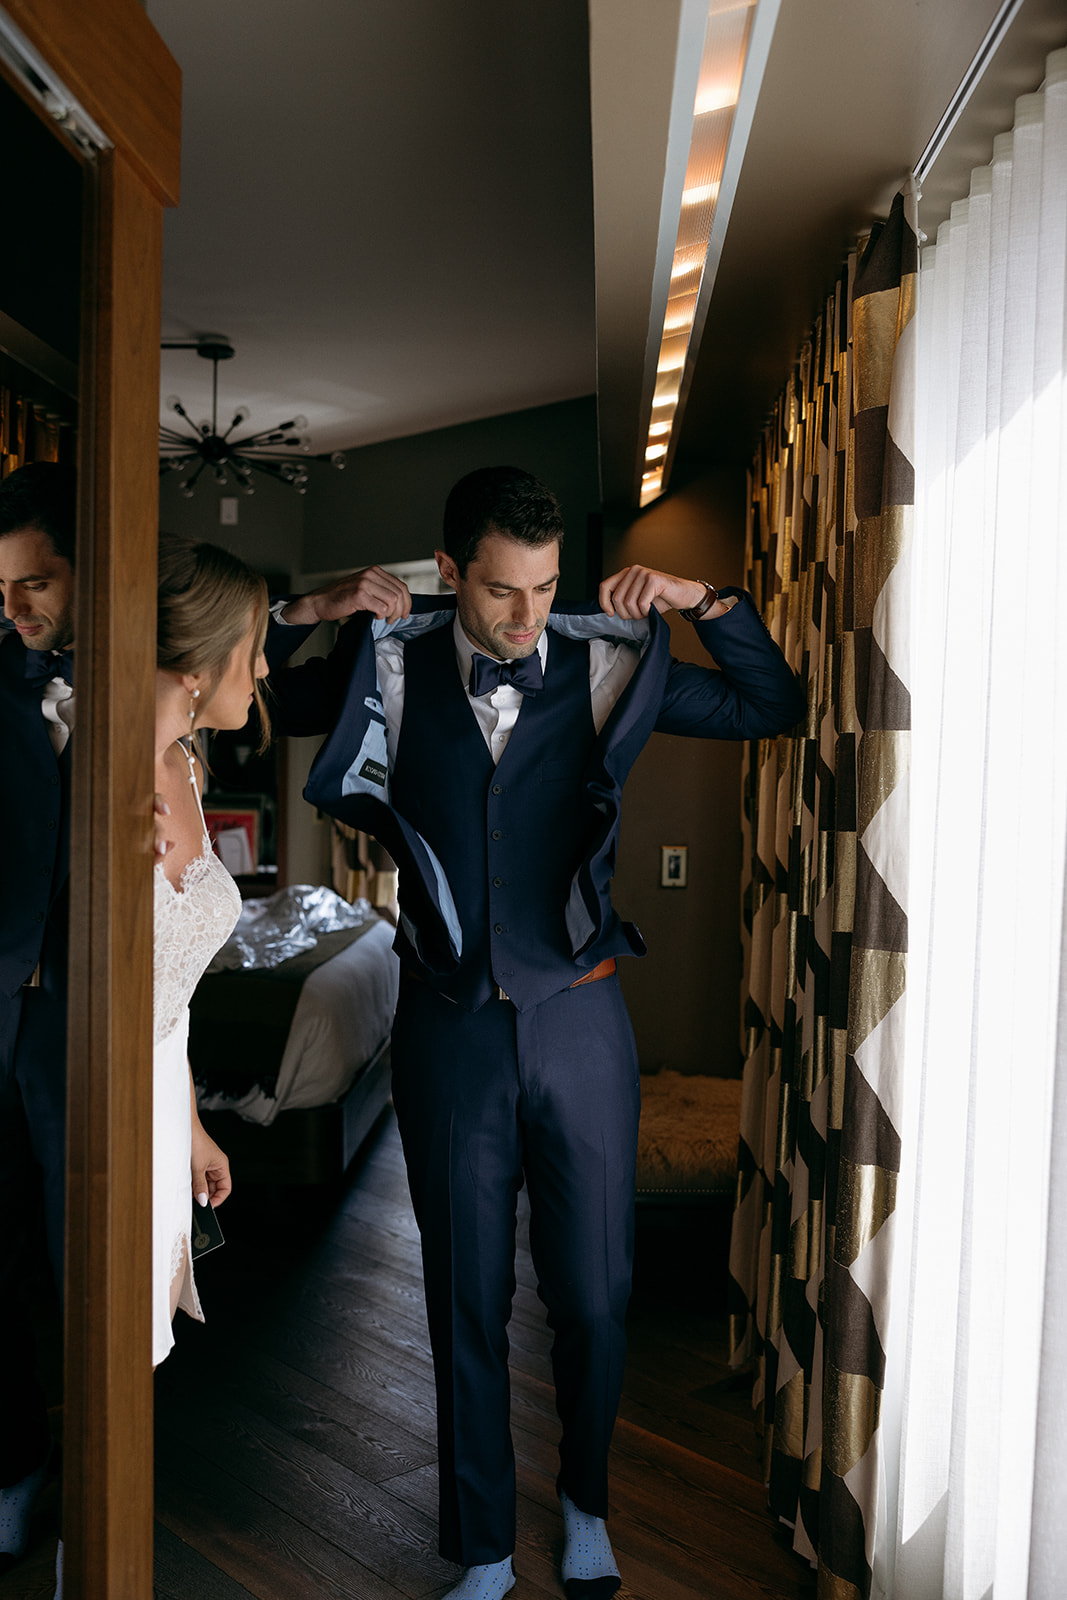 A bride and groom gets ready for his wedding day at The Roxy